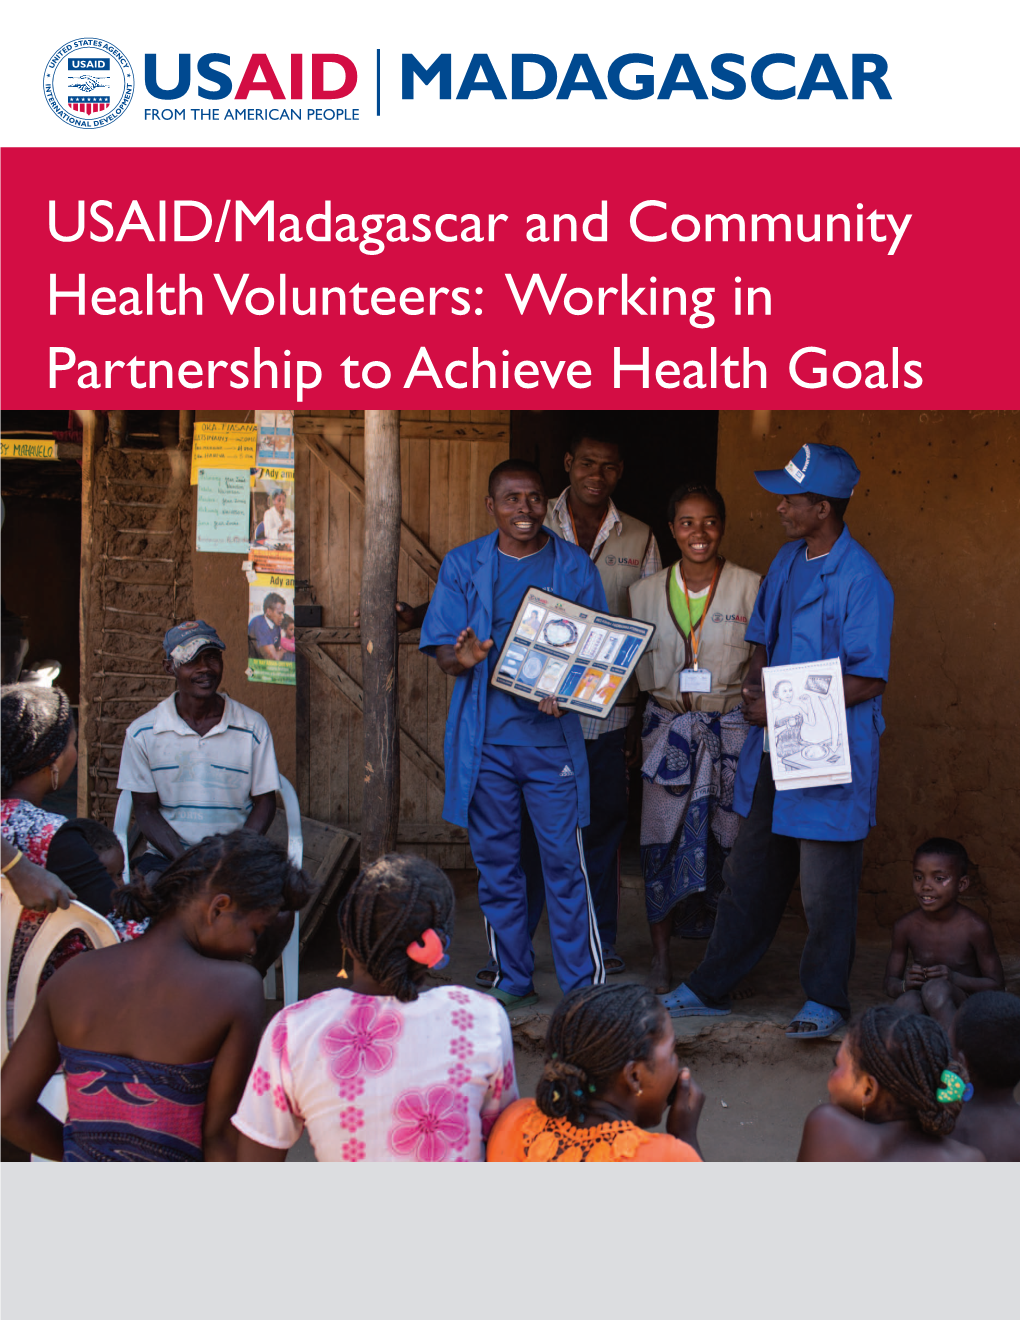 USAID/Madagascar and Community Health Volunteers: Working in Partnership to Achieve Health Goals